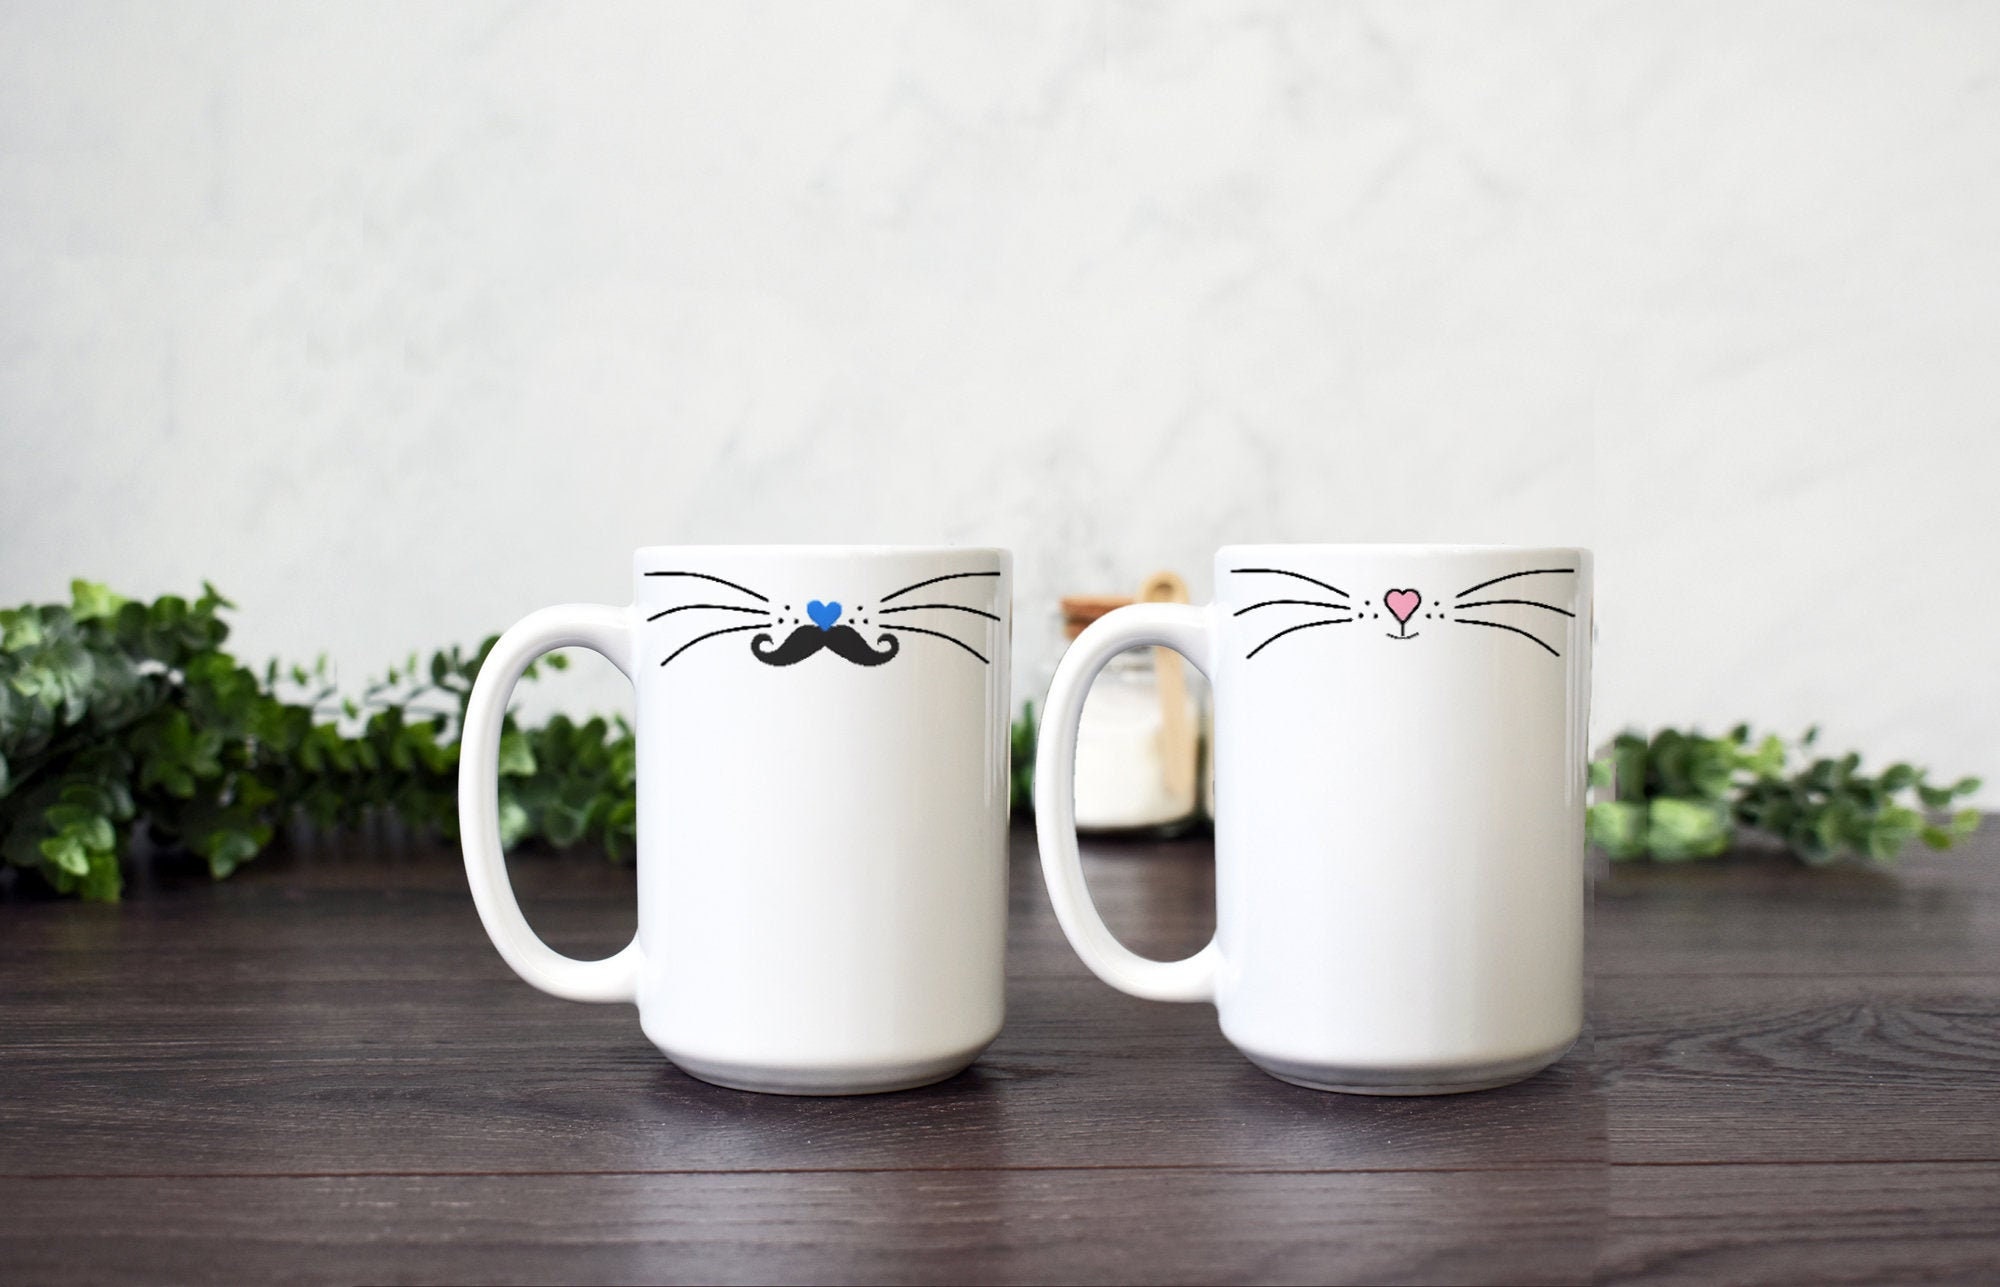 JVSupply Valentines Day Gifts Cute Kissing Cat Mug Matching Couples Stuff Ceramic Coffee Mug Set Couple Gifts for Wedding Anniversary Engagement